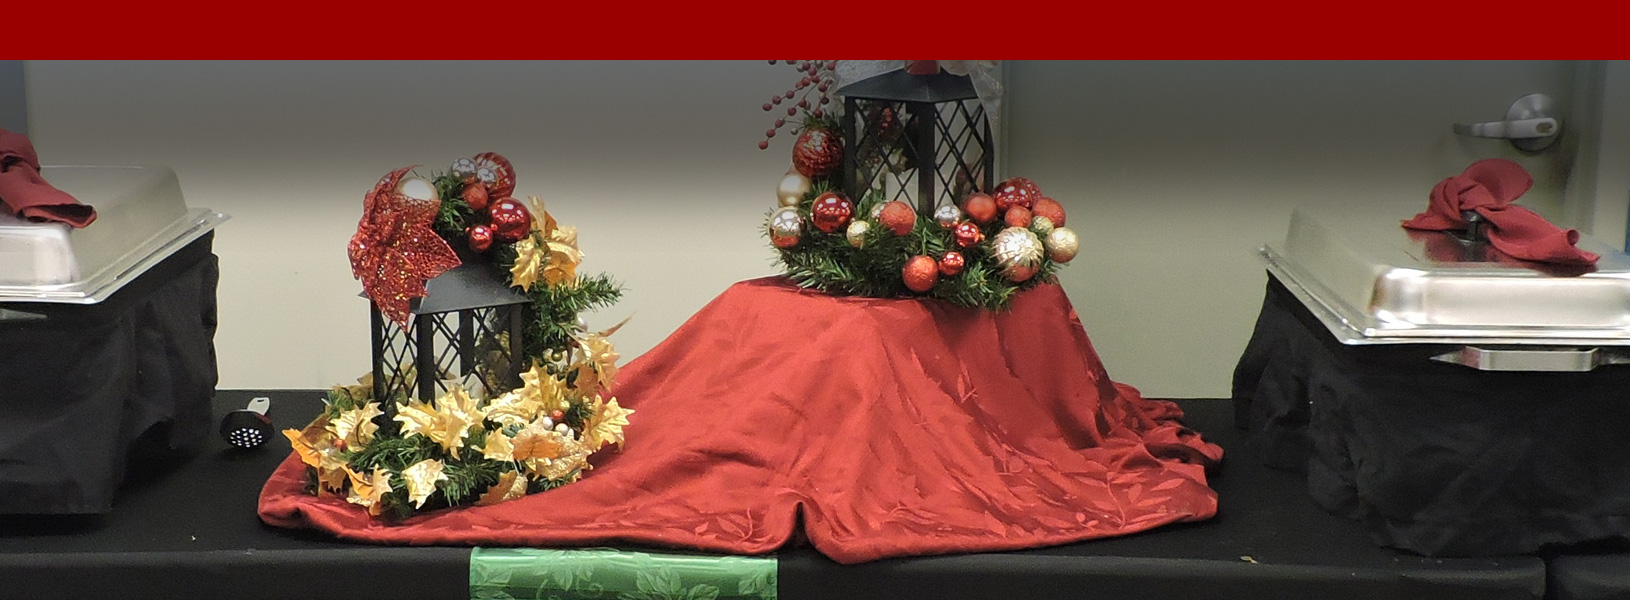 Holiday Catering - Elite Event Services